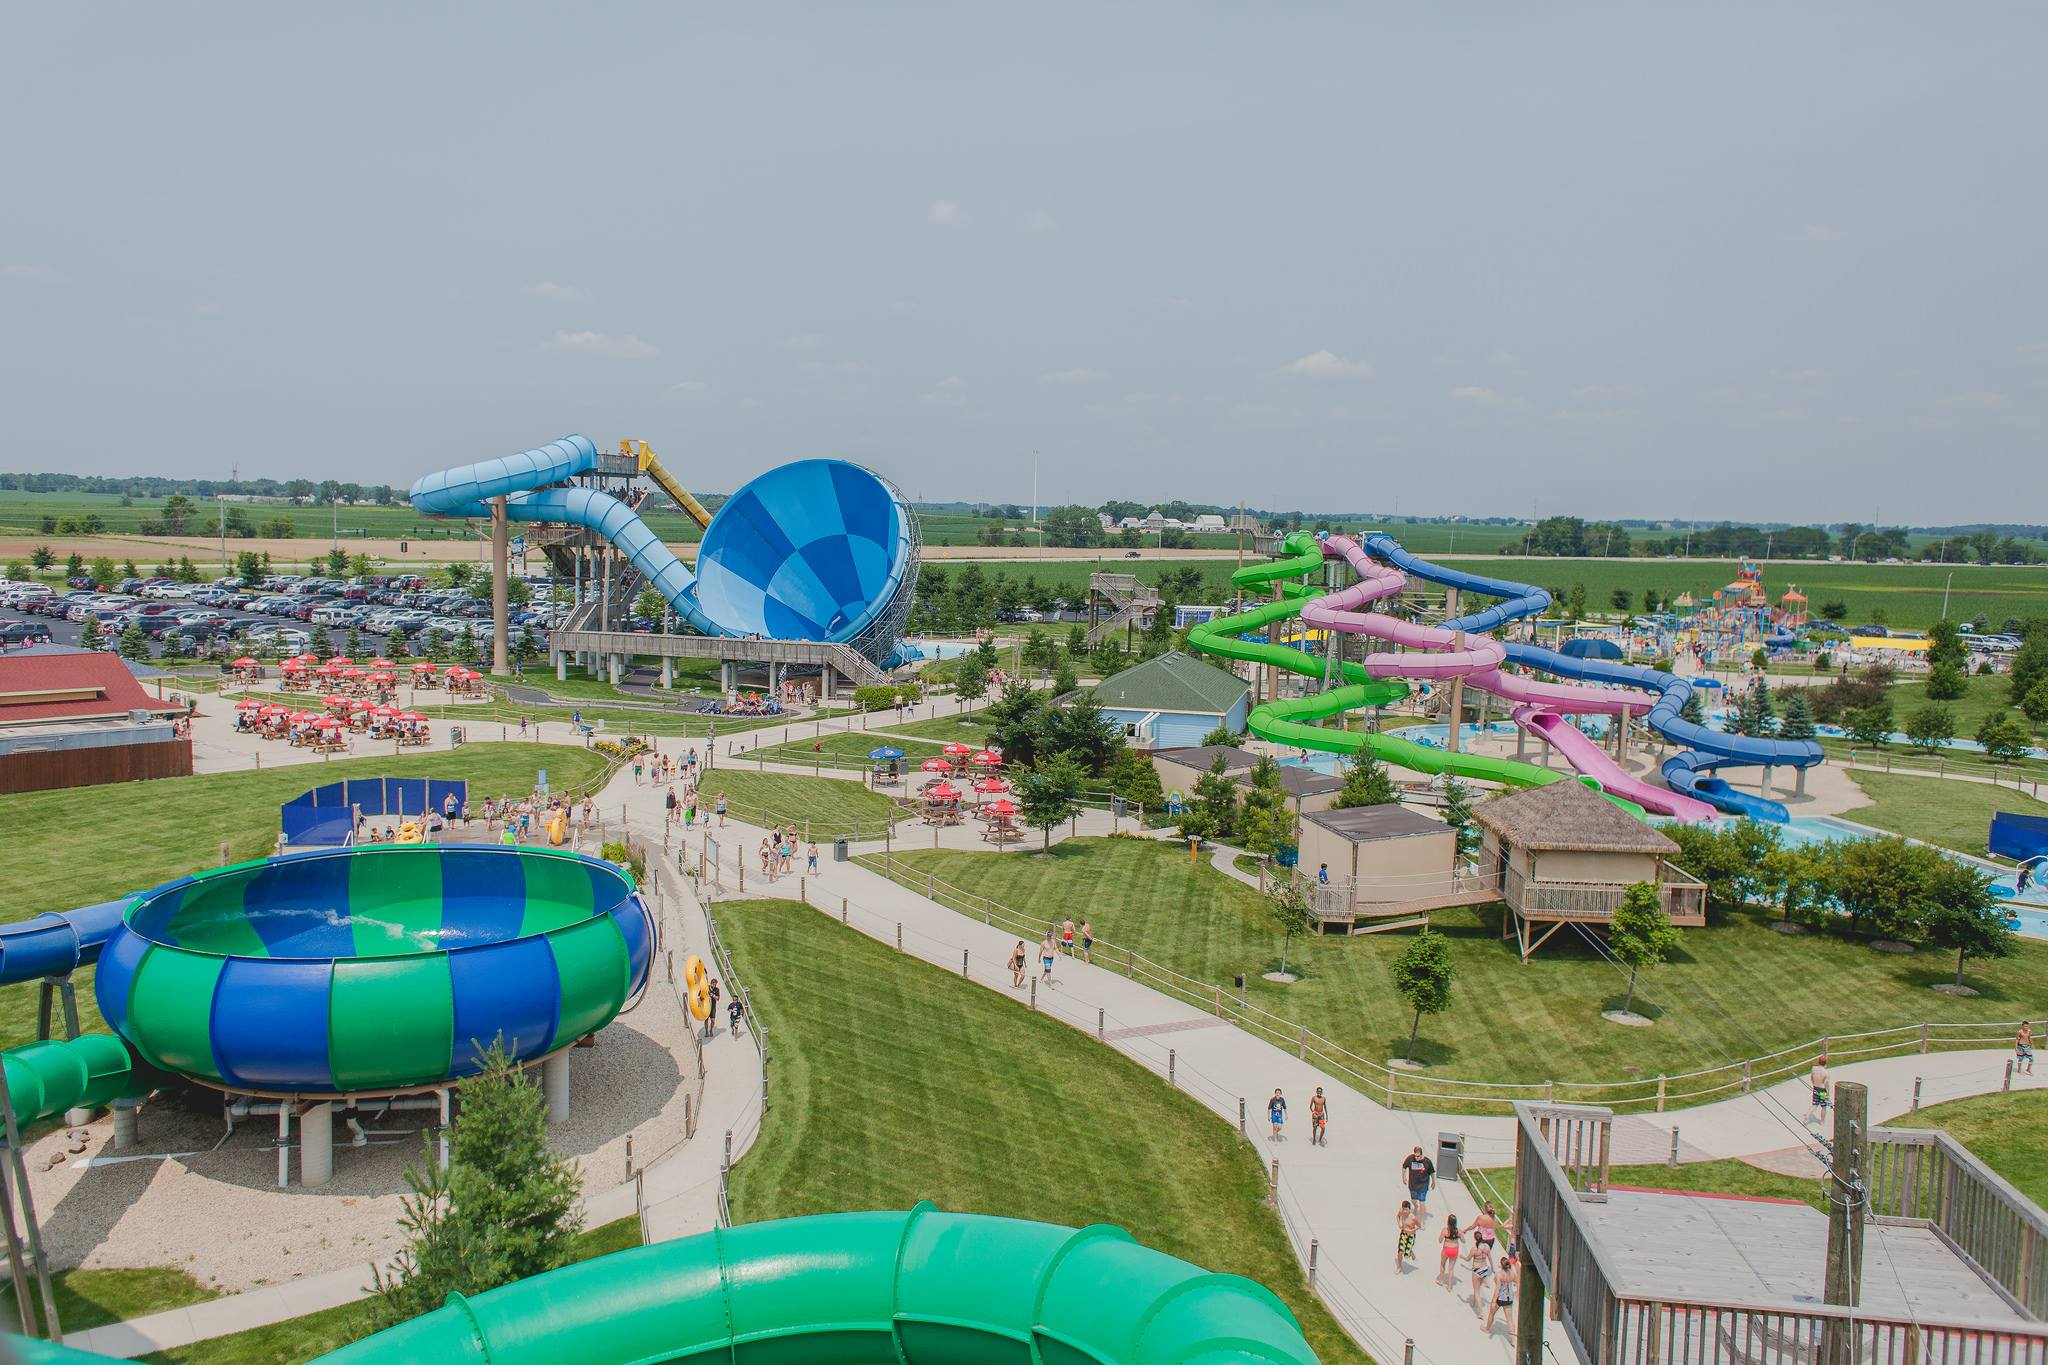 The Most Spectacular Waterslide In Illinois Will Take You On A Ride Like No Other